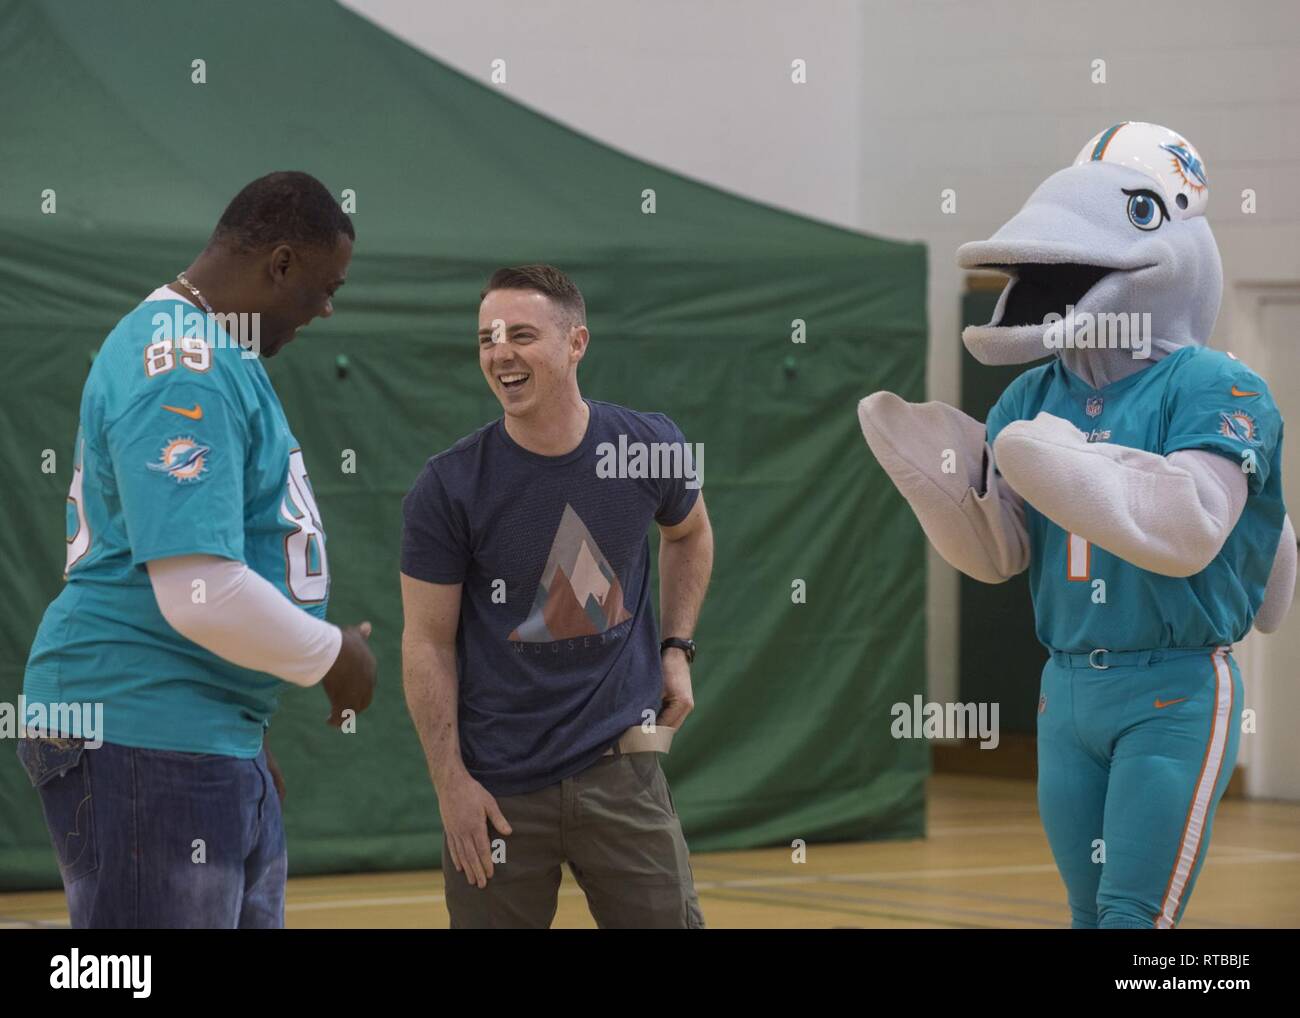 423rd Force Support Squadron hosts the Miami Dolphin Cheerleaders Feb. 2, 2019, at RAF Alconbury, United Kingdom during the 2019 Superbowl weekend. The cheerleaders conducted a cheer camp for base personnel. Stock Photo